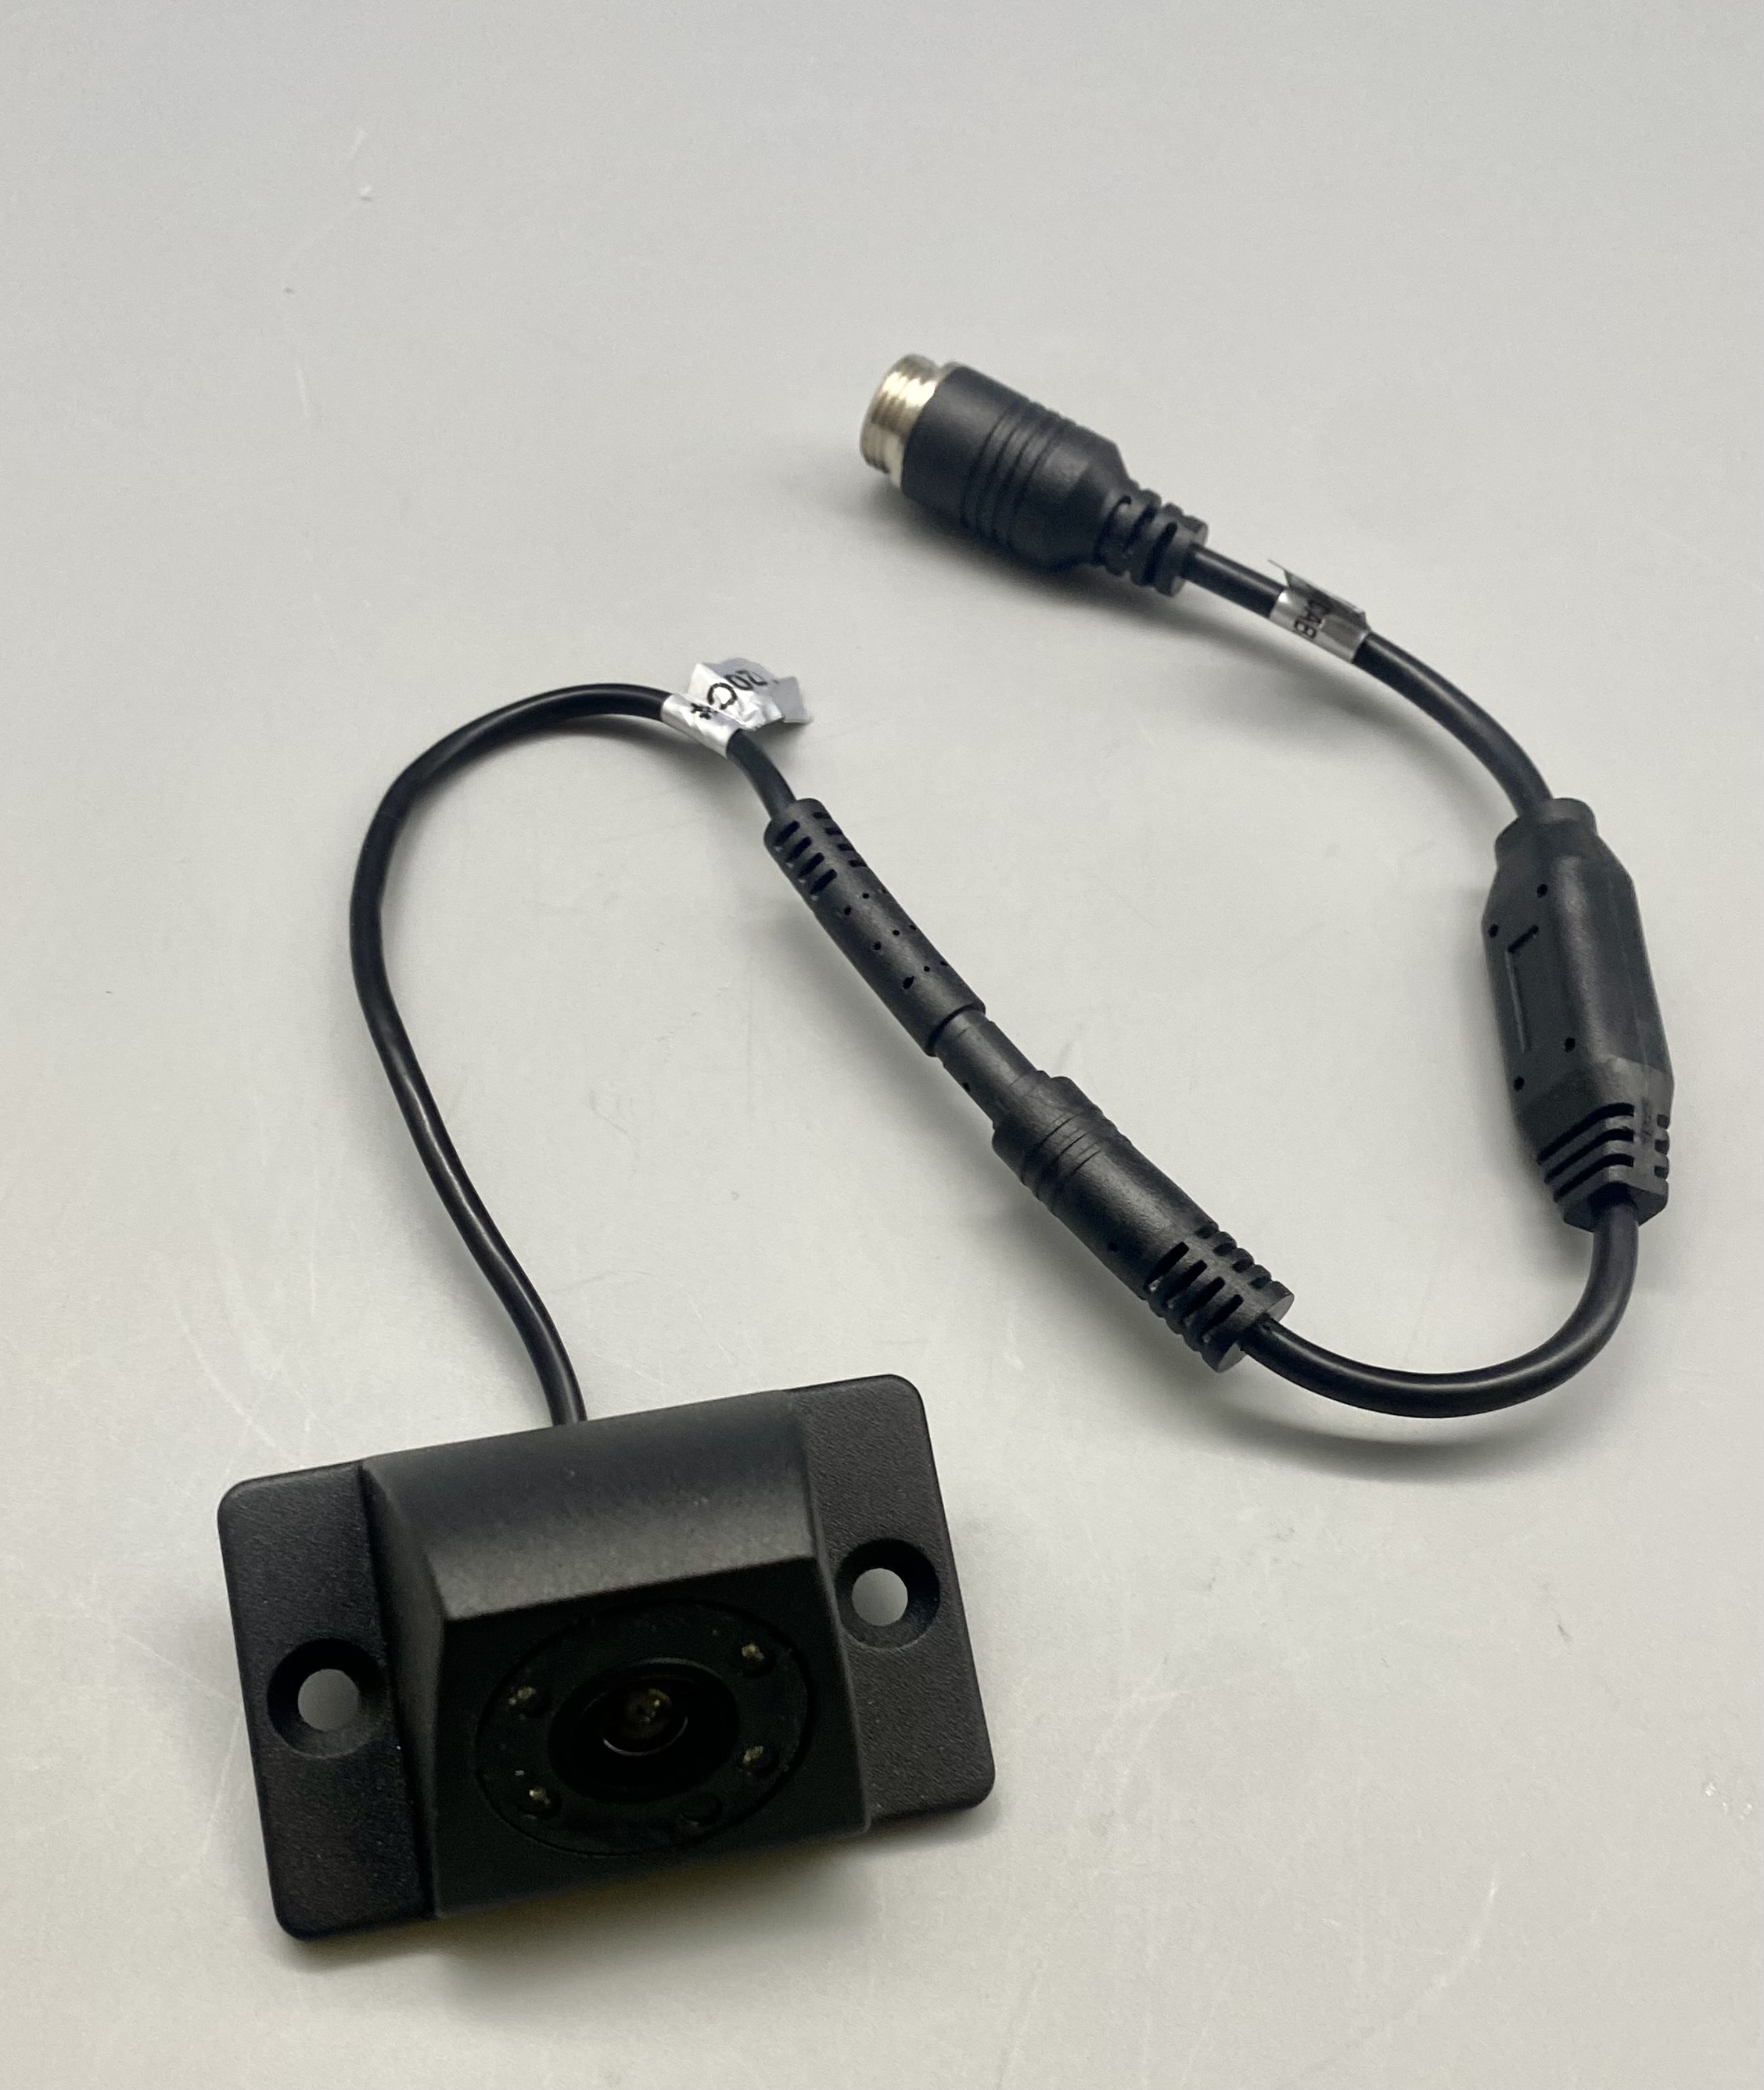 RVS Compact Surface-Mount Left-Hand Side Camera with 5-pin micro connector.